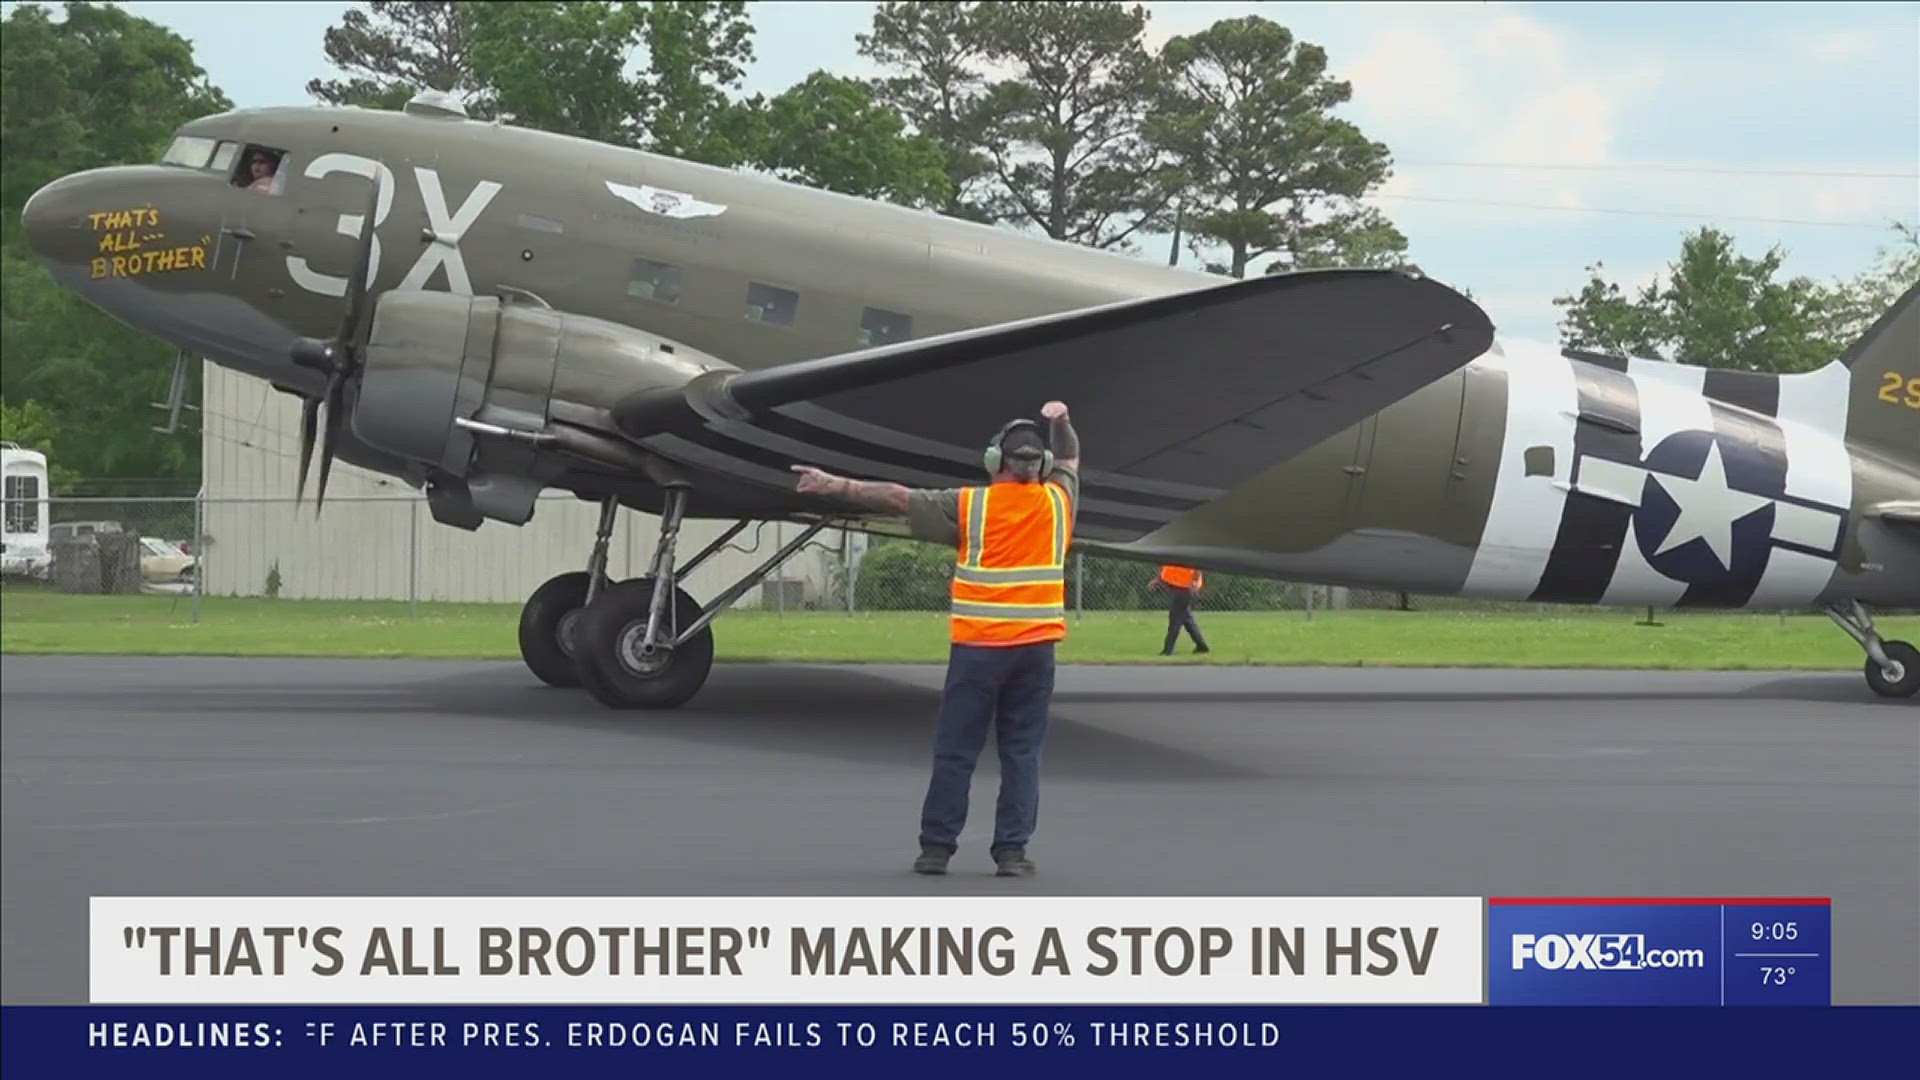 The C-47 "That's All Brother" will be in Huntsville through May 17 for public tours.